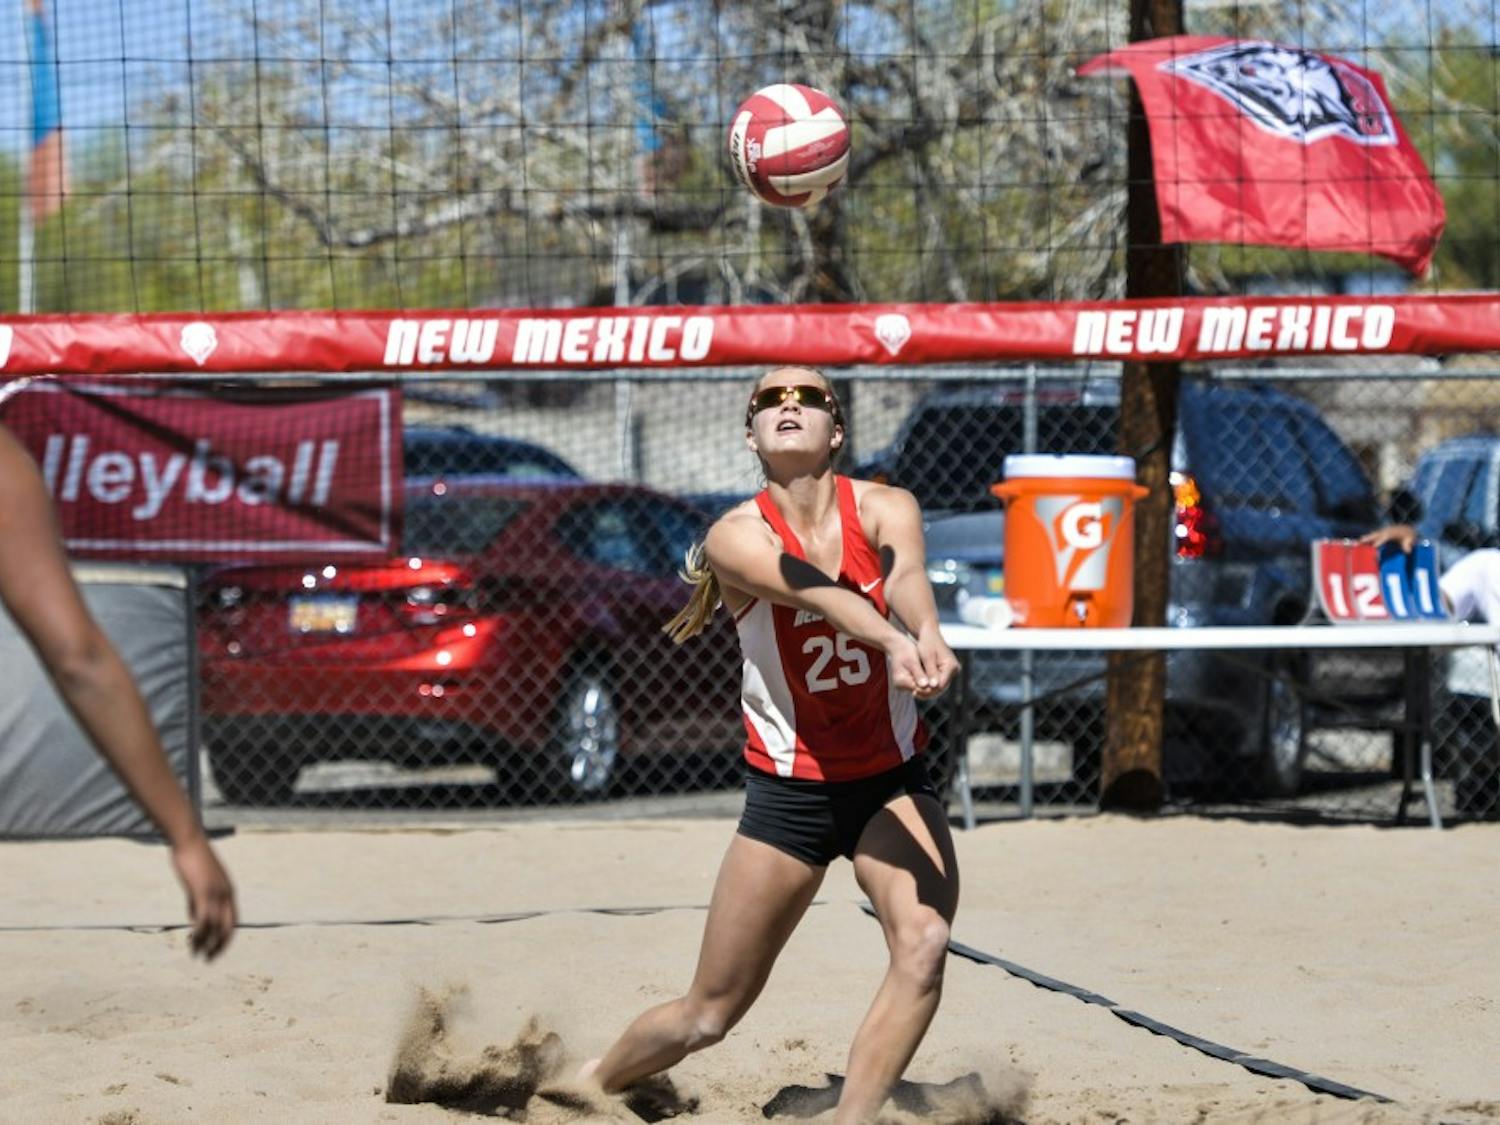 Junior Lise Rugland rushes to hit the ball back to set Devanne Sours up for a kill against a Colorado Mesa player March 18, 2016 at Lucky 66 Bowls sand volleyball courts. The Lobos beach volleyball program was ranked in the top 20 programs in the nation by DiG magazine.